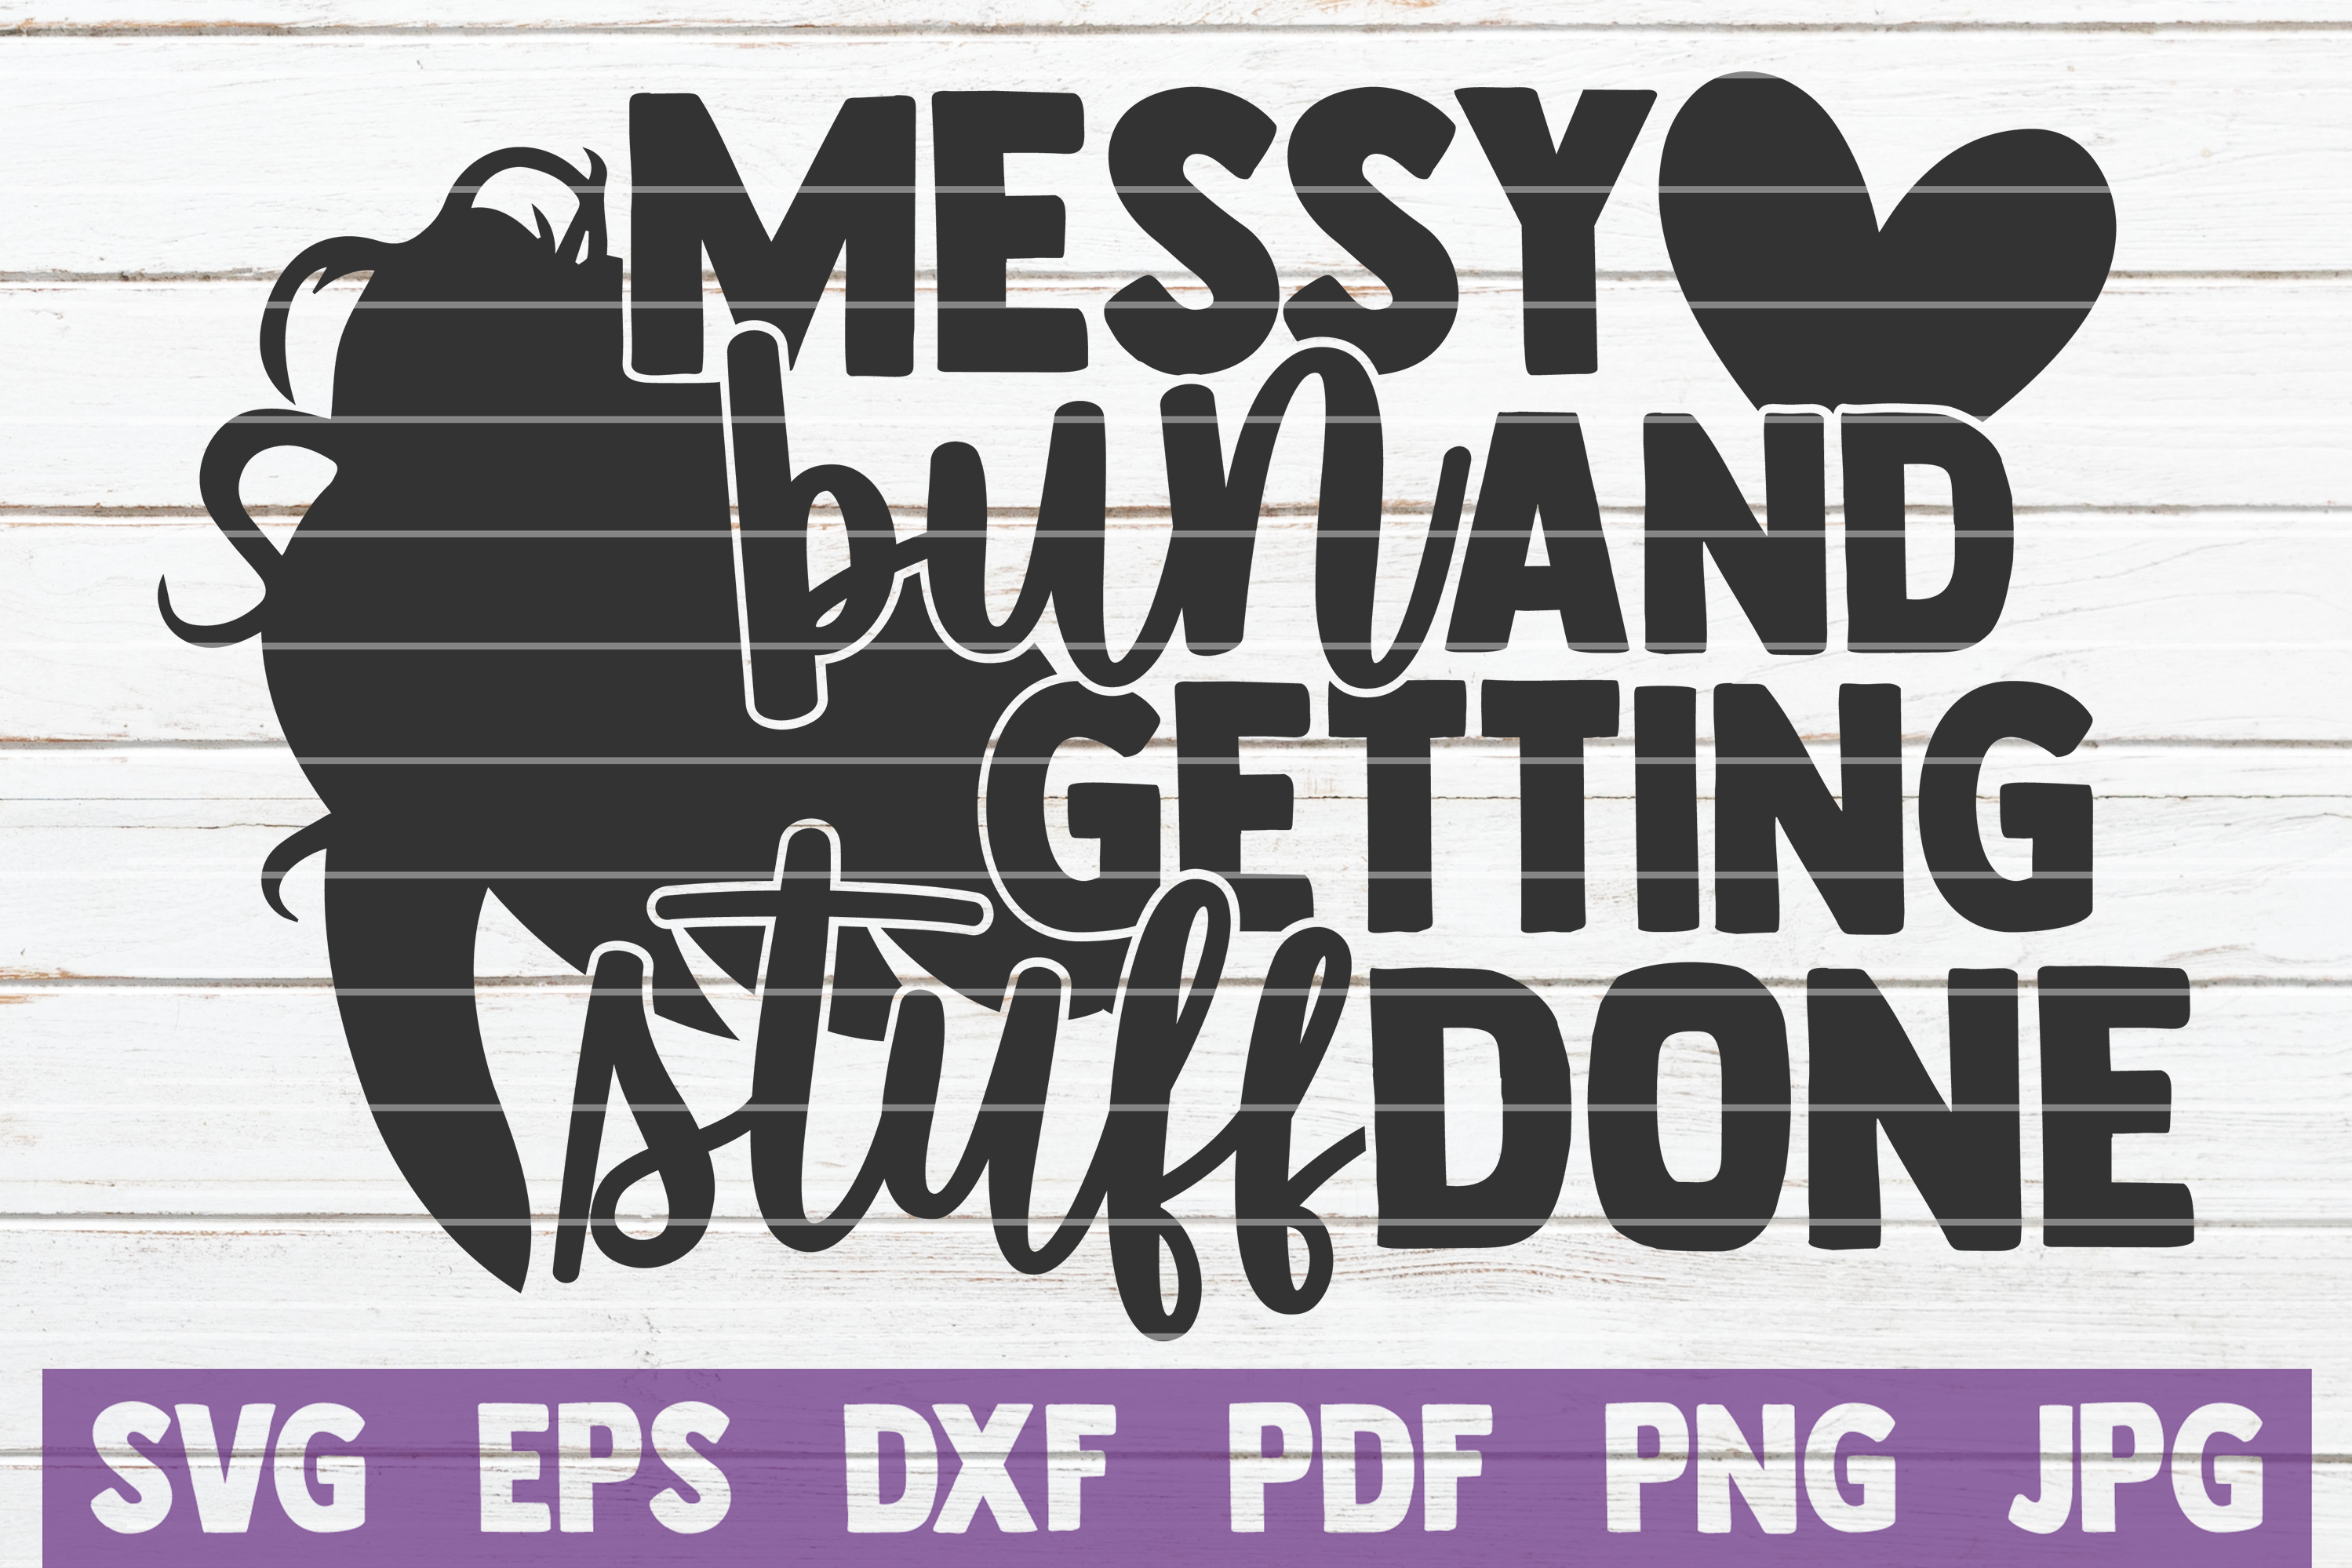 Messy Bun And Getting Stuff Done SVG Cut File